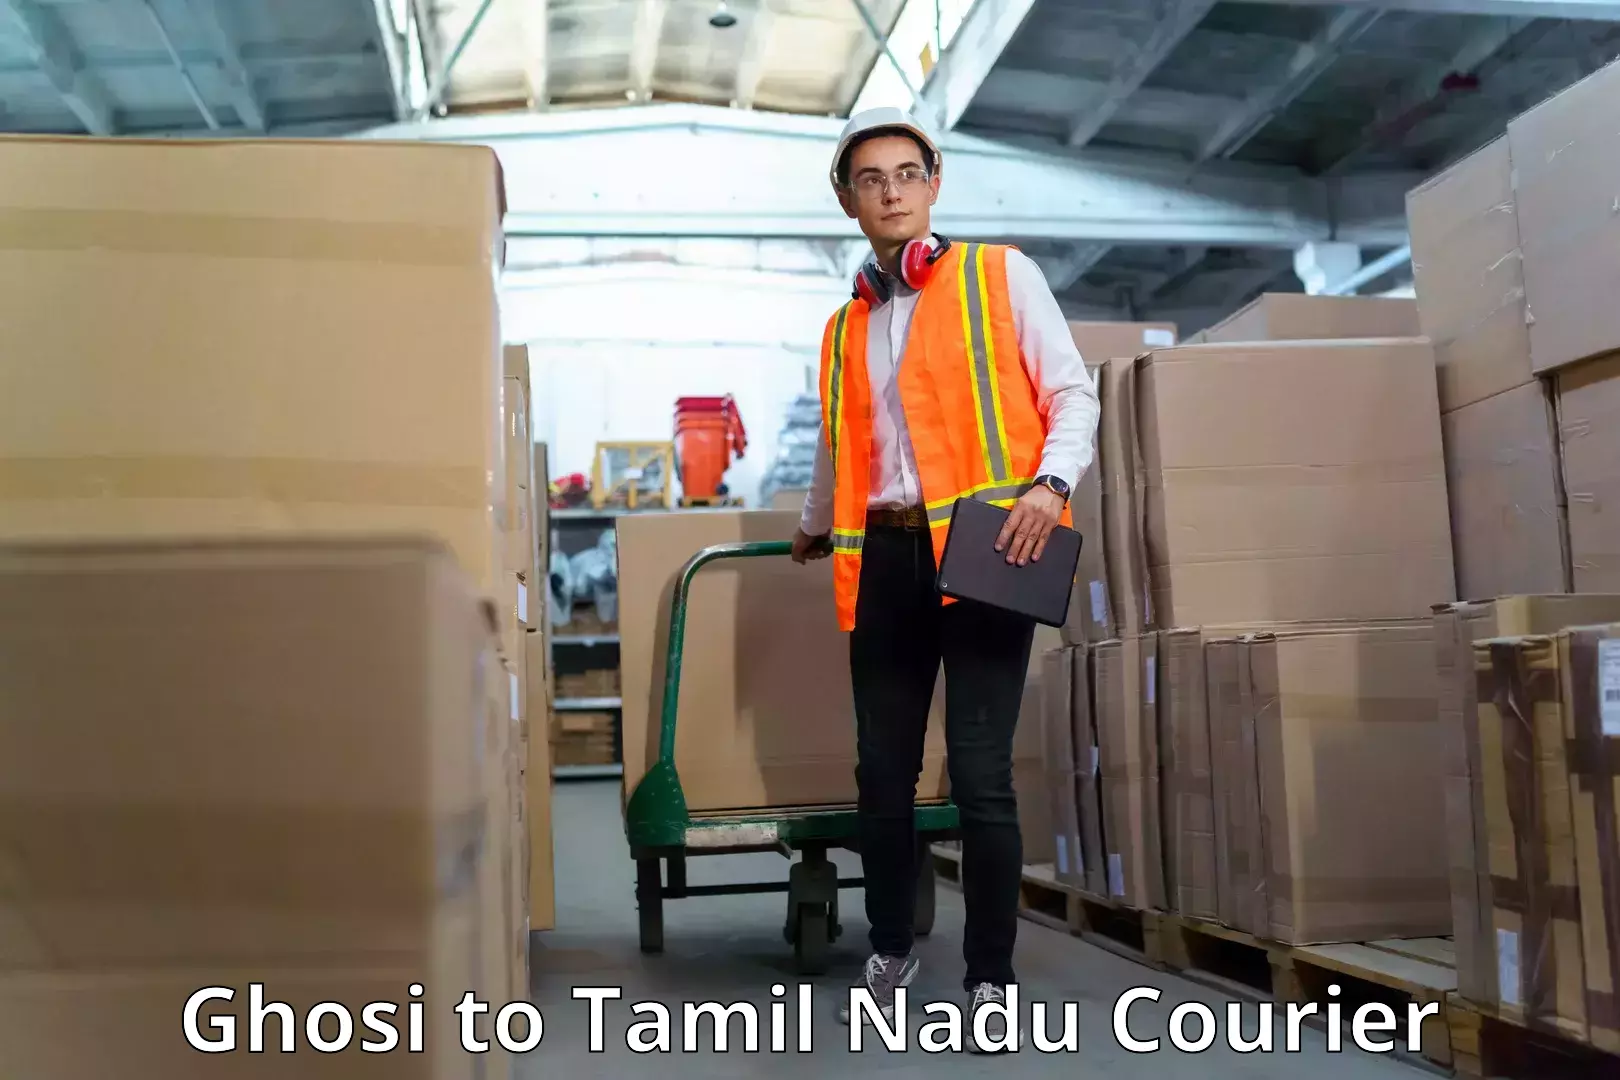 State-of-the-art courier technology Ghosi to Tamil Nadu